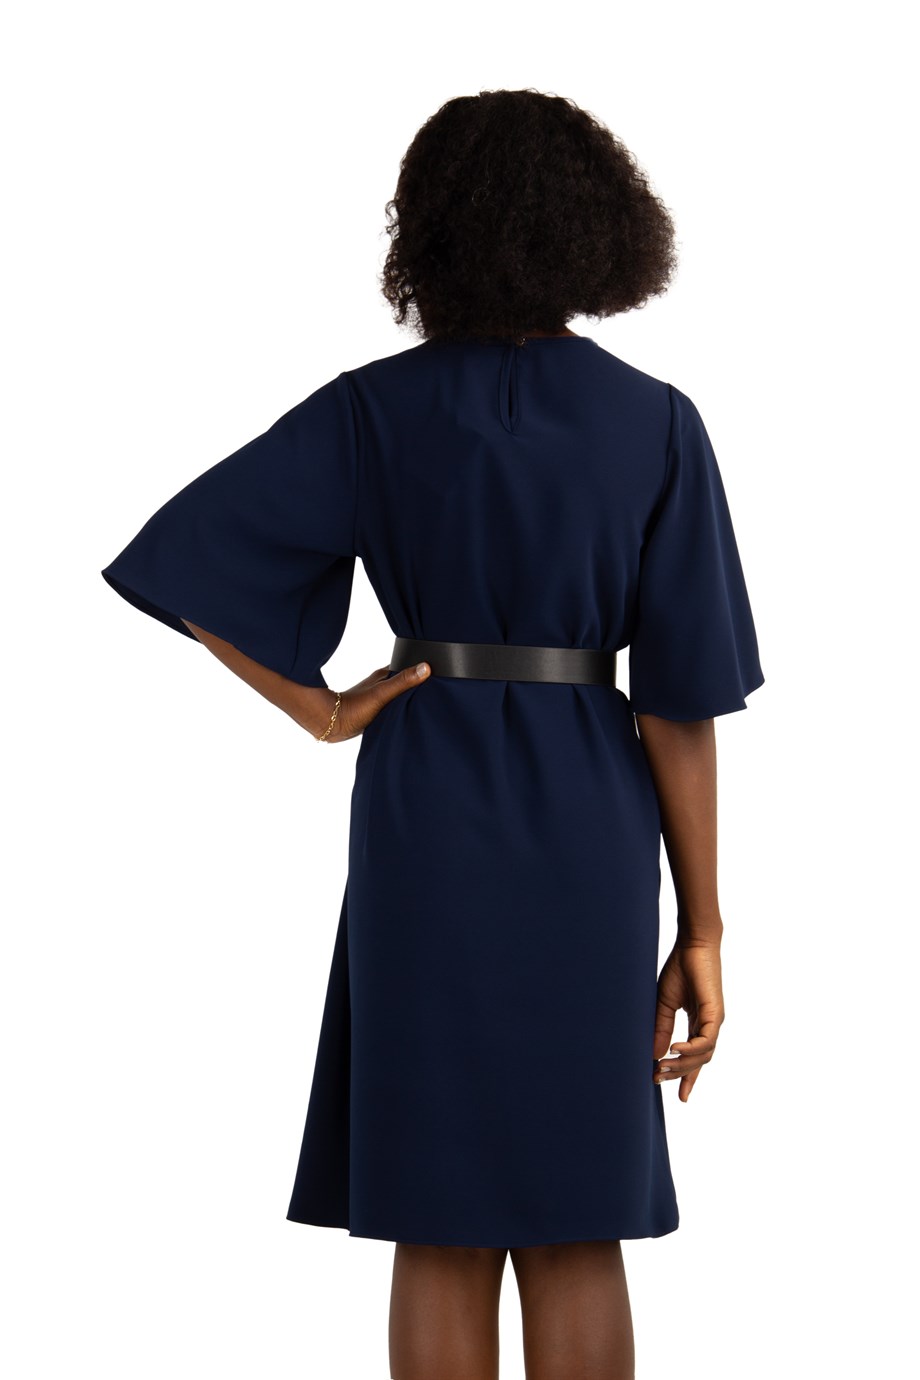 Key Hole Neck Bell Sleeve Dress - Navy Blue - Wholesale Womens Clothing  Vendors For Boutiques